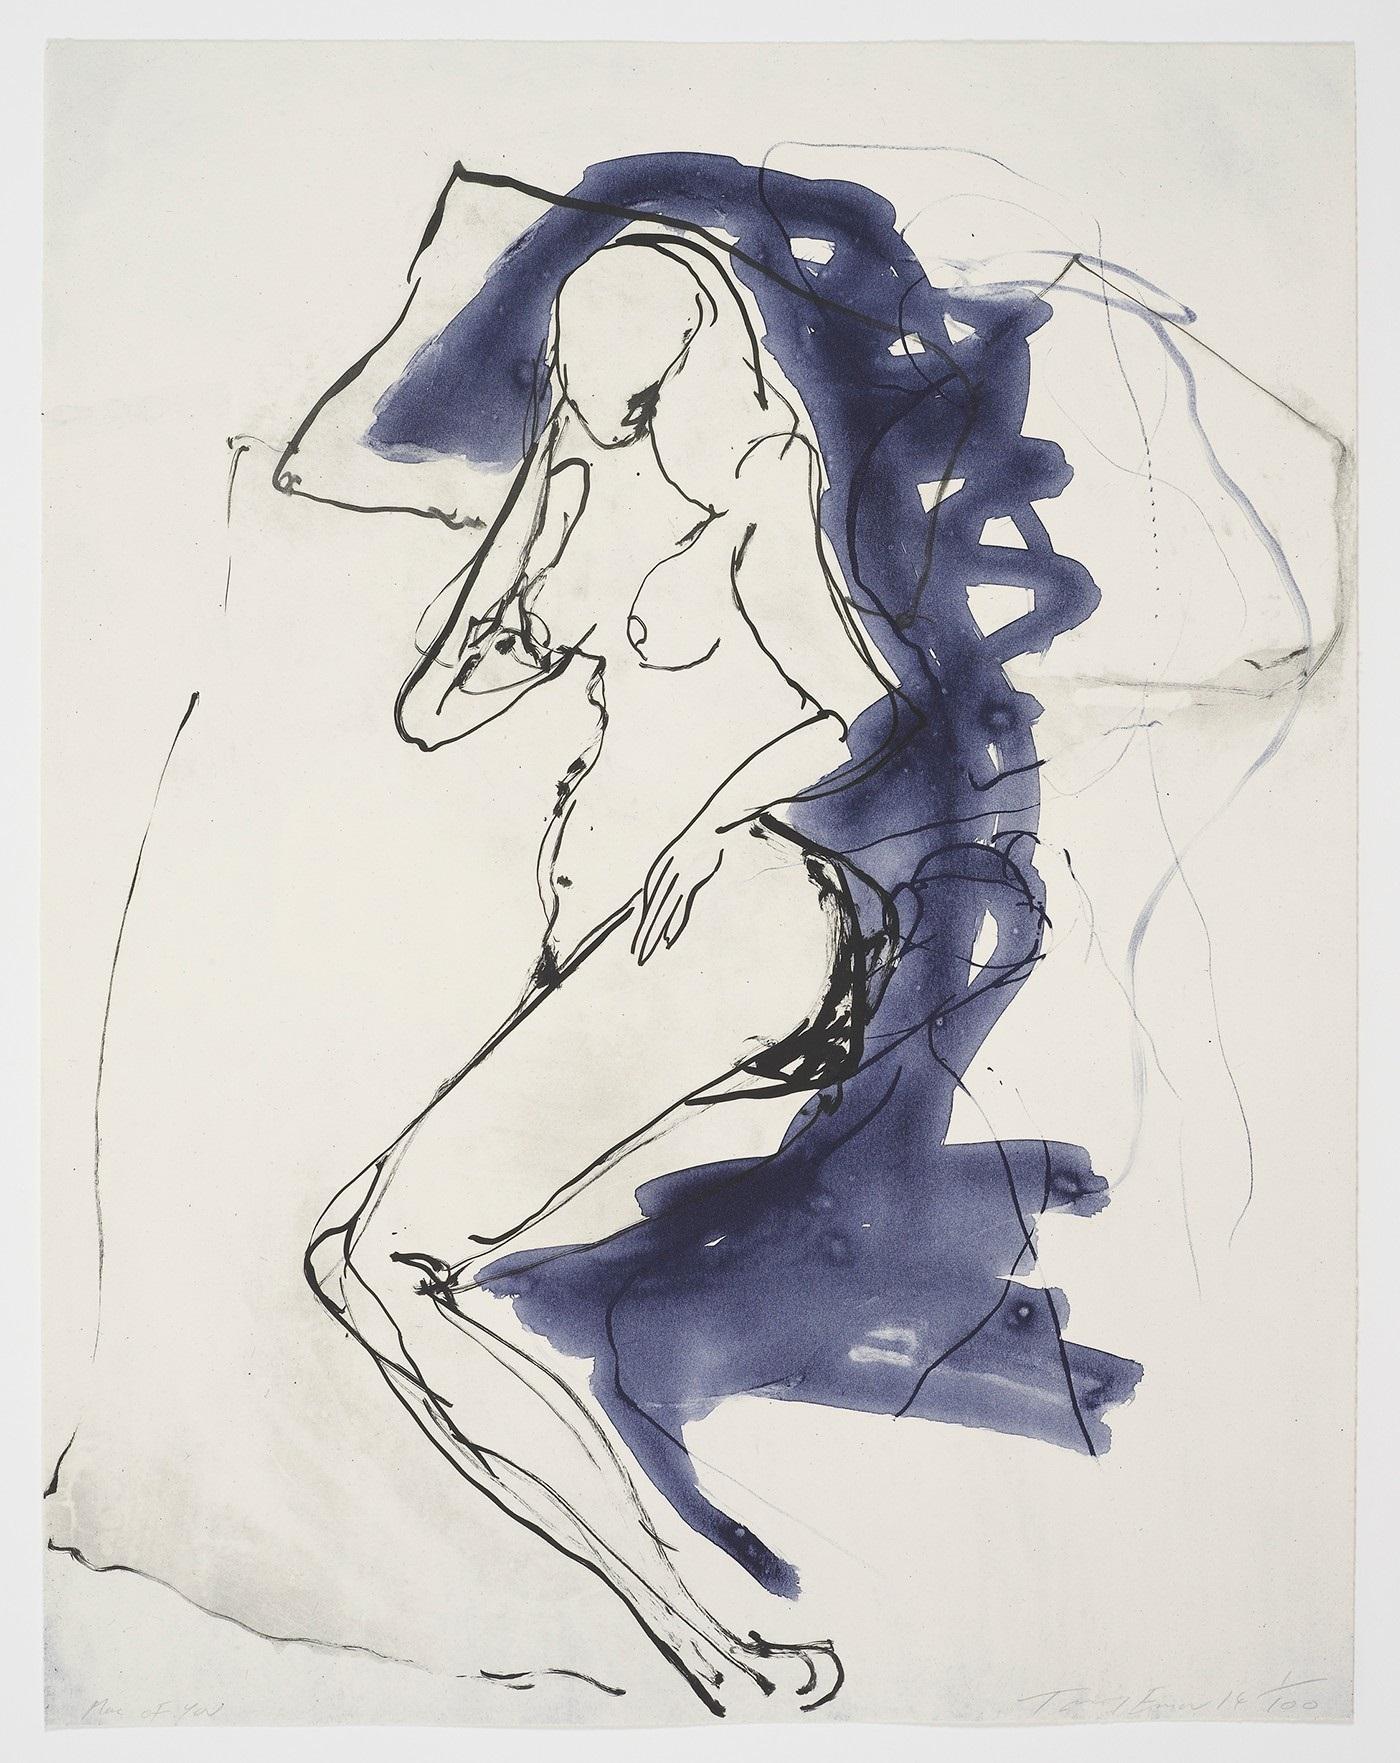 More of you (2014) (signed) - Print by Tracey Emin